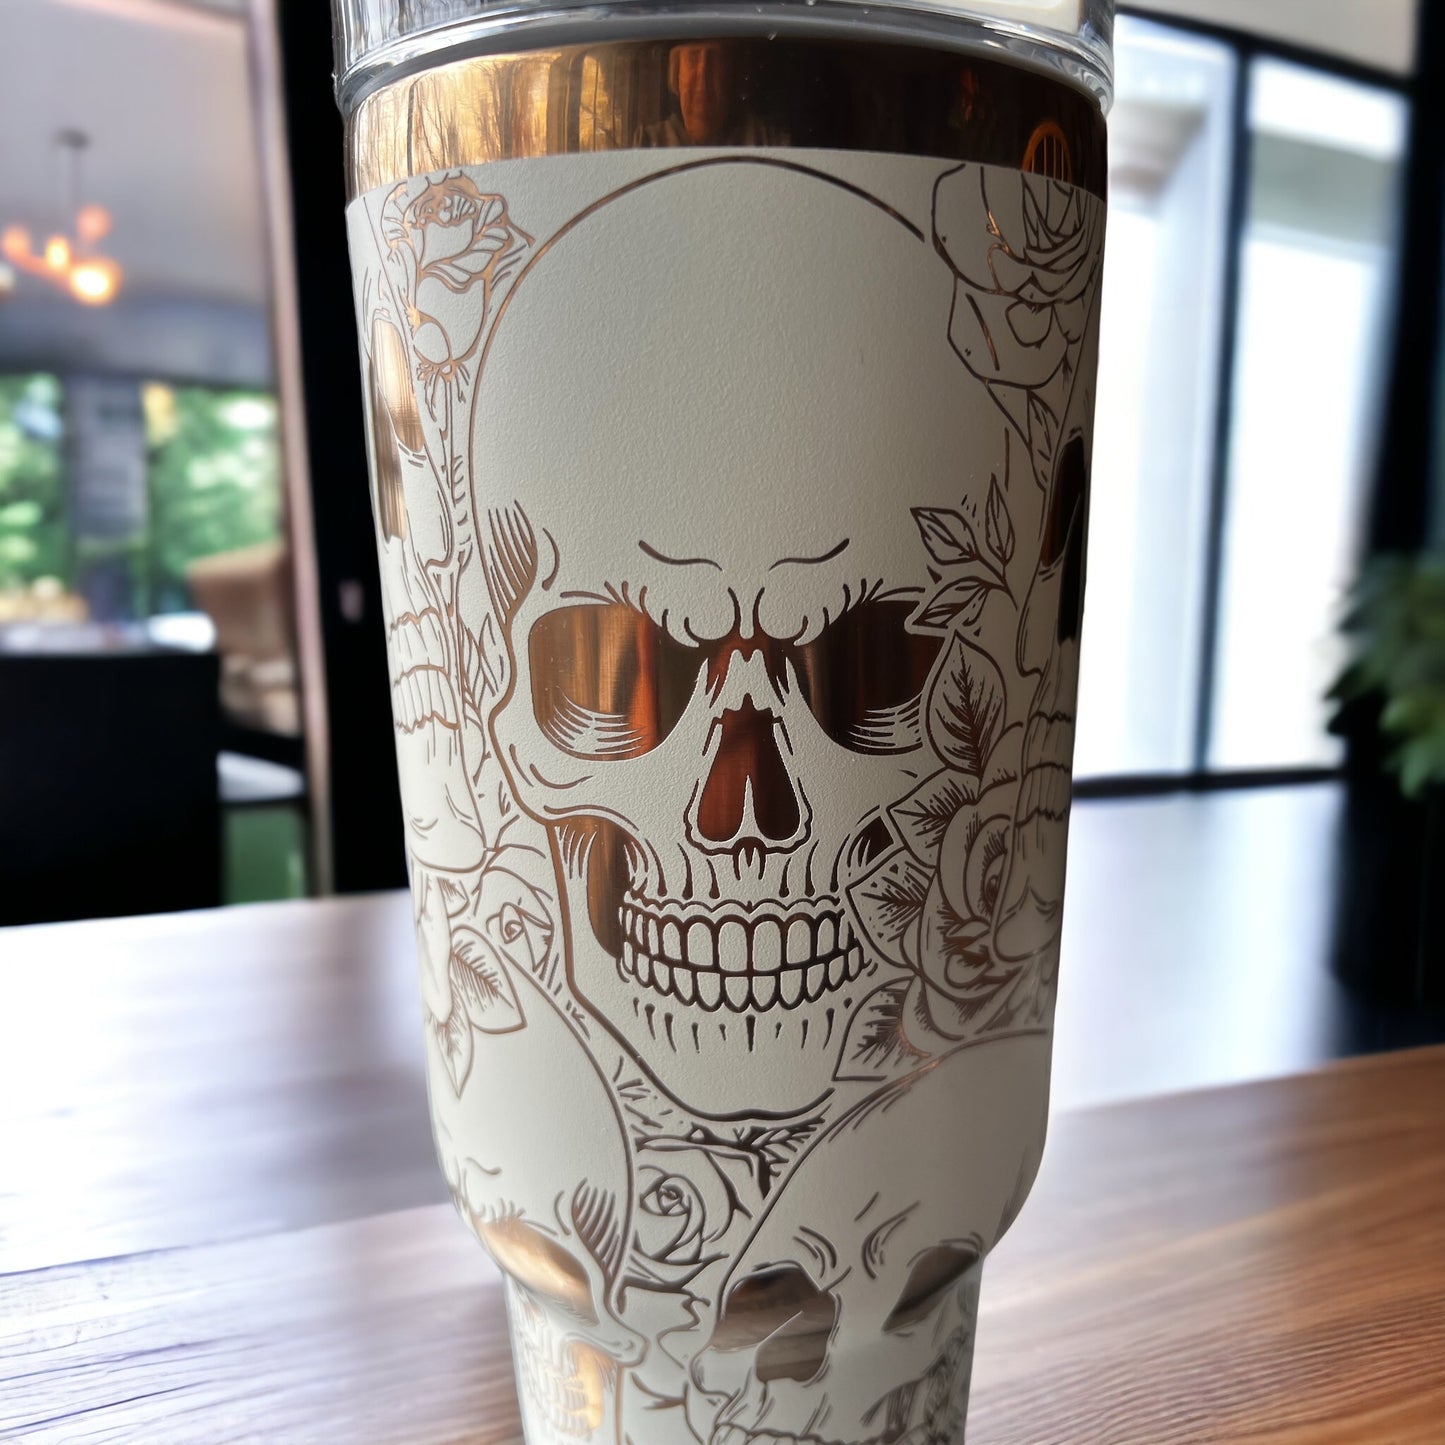 40 ounce engraved stainless steel tumbler Sculls